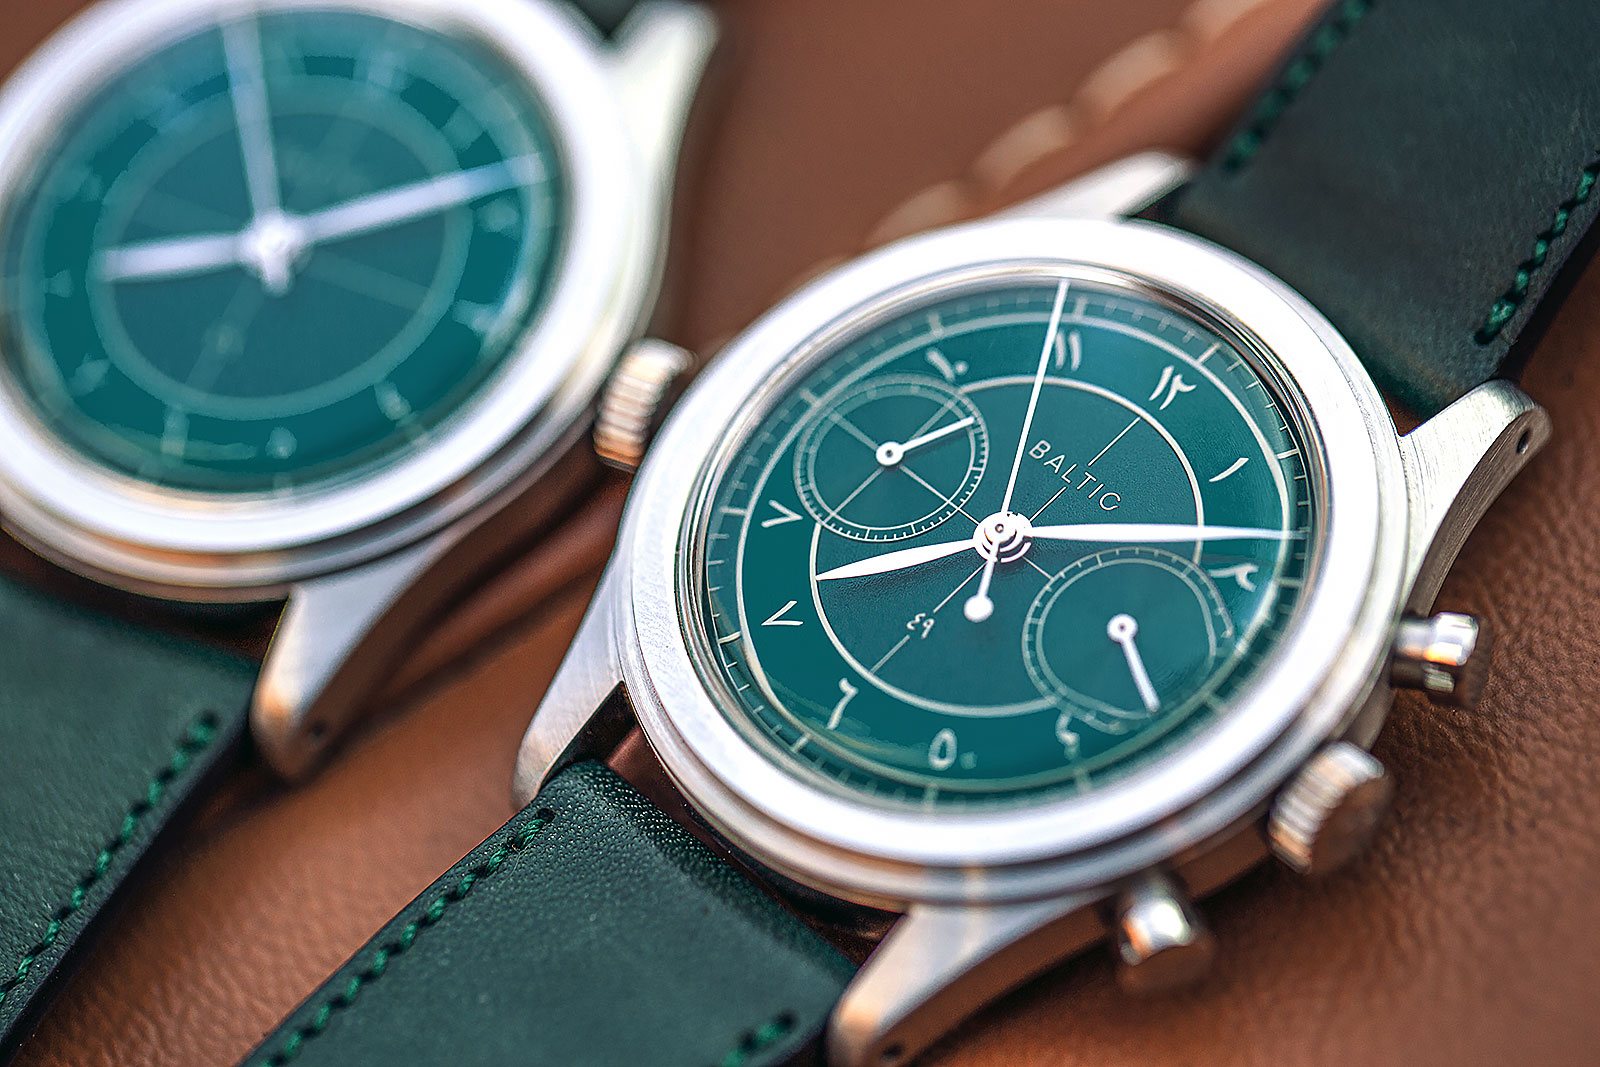 Introducing the Baltic Watches Bicompax 001 Chronograph and Time-Only HMS  001 | SJX Watches